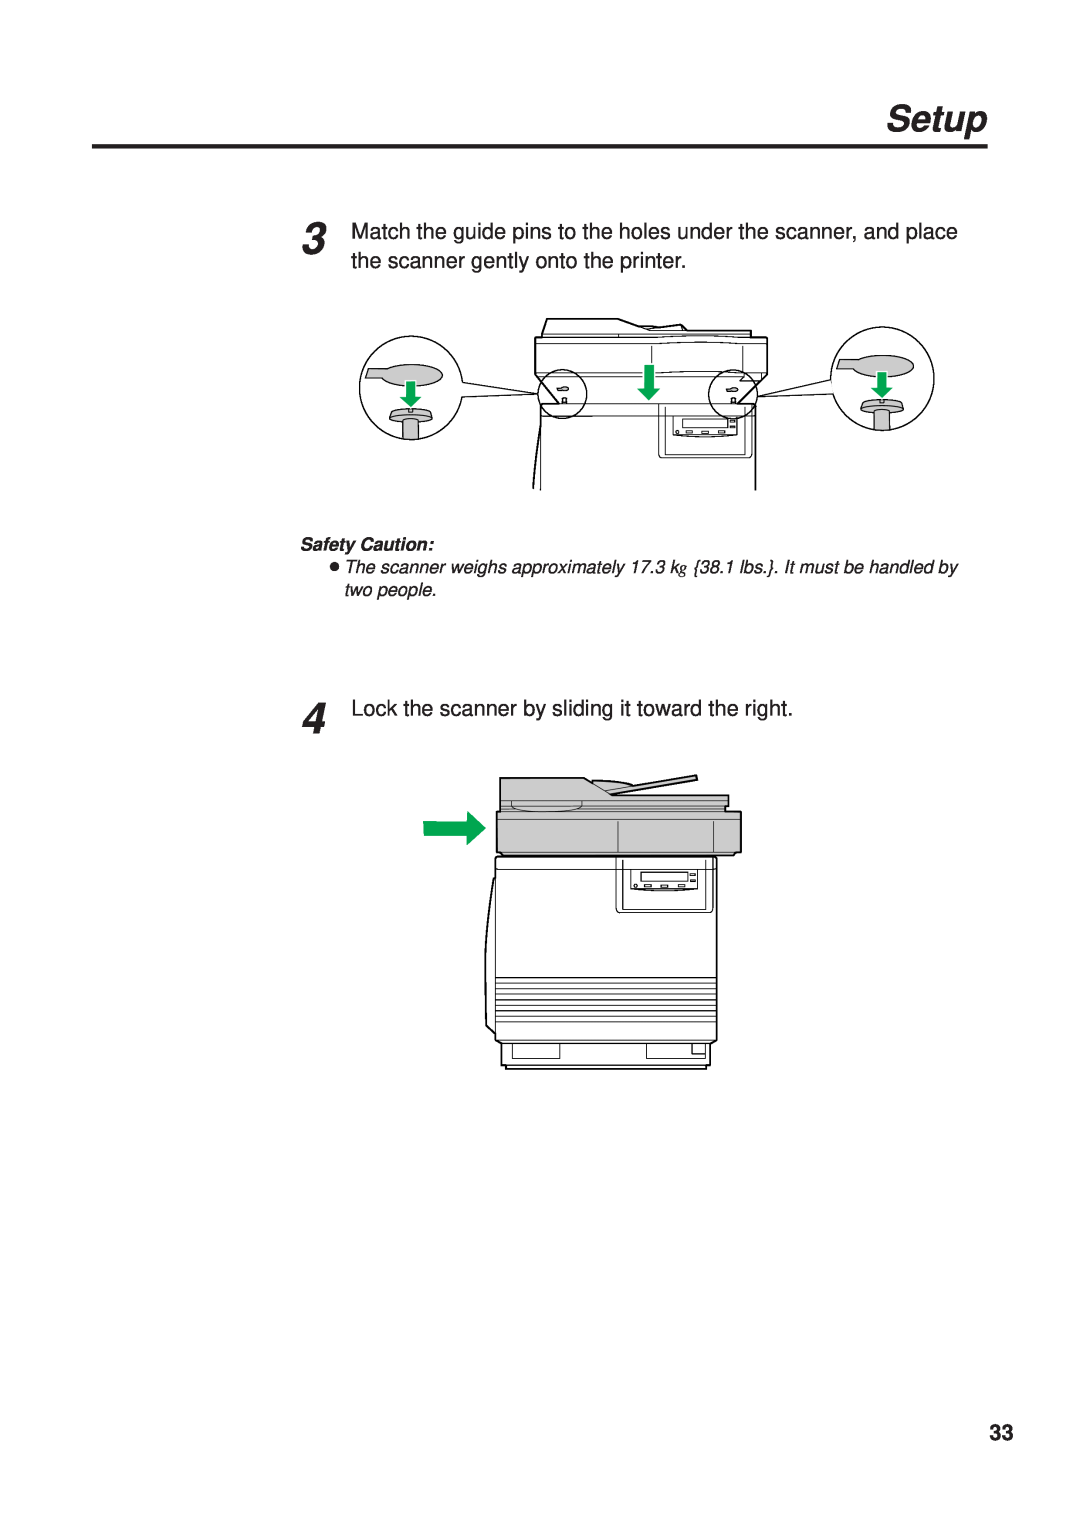 Panasonic KX-PS8000 Match the guide pins to the holes under the scanner, and place, the scanner gently onto the printer 